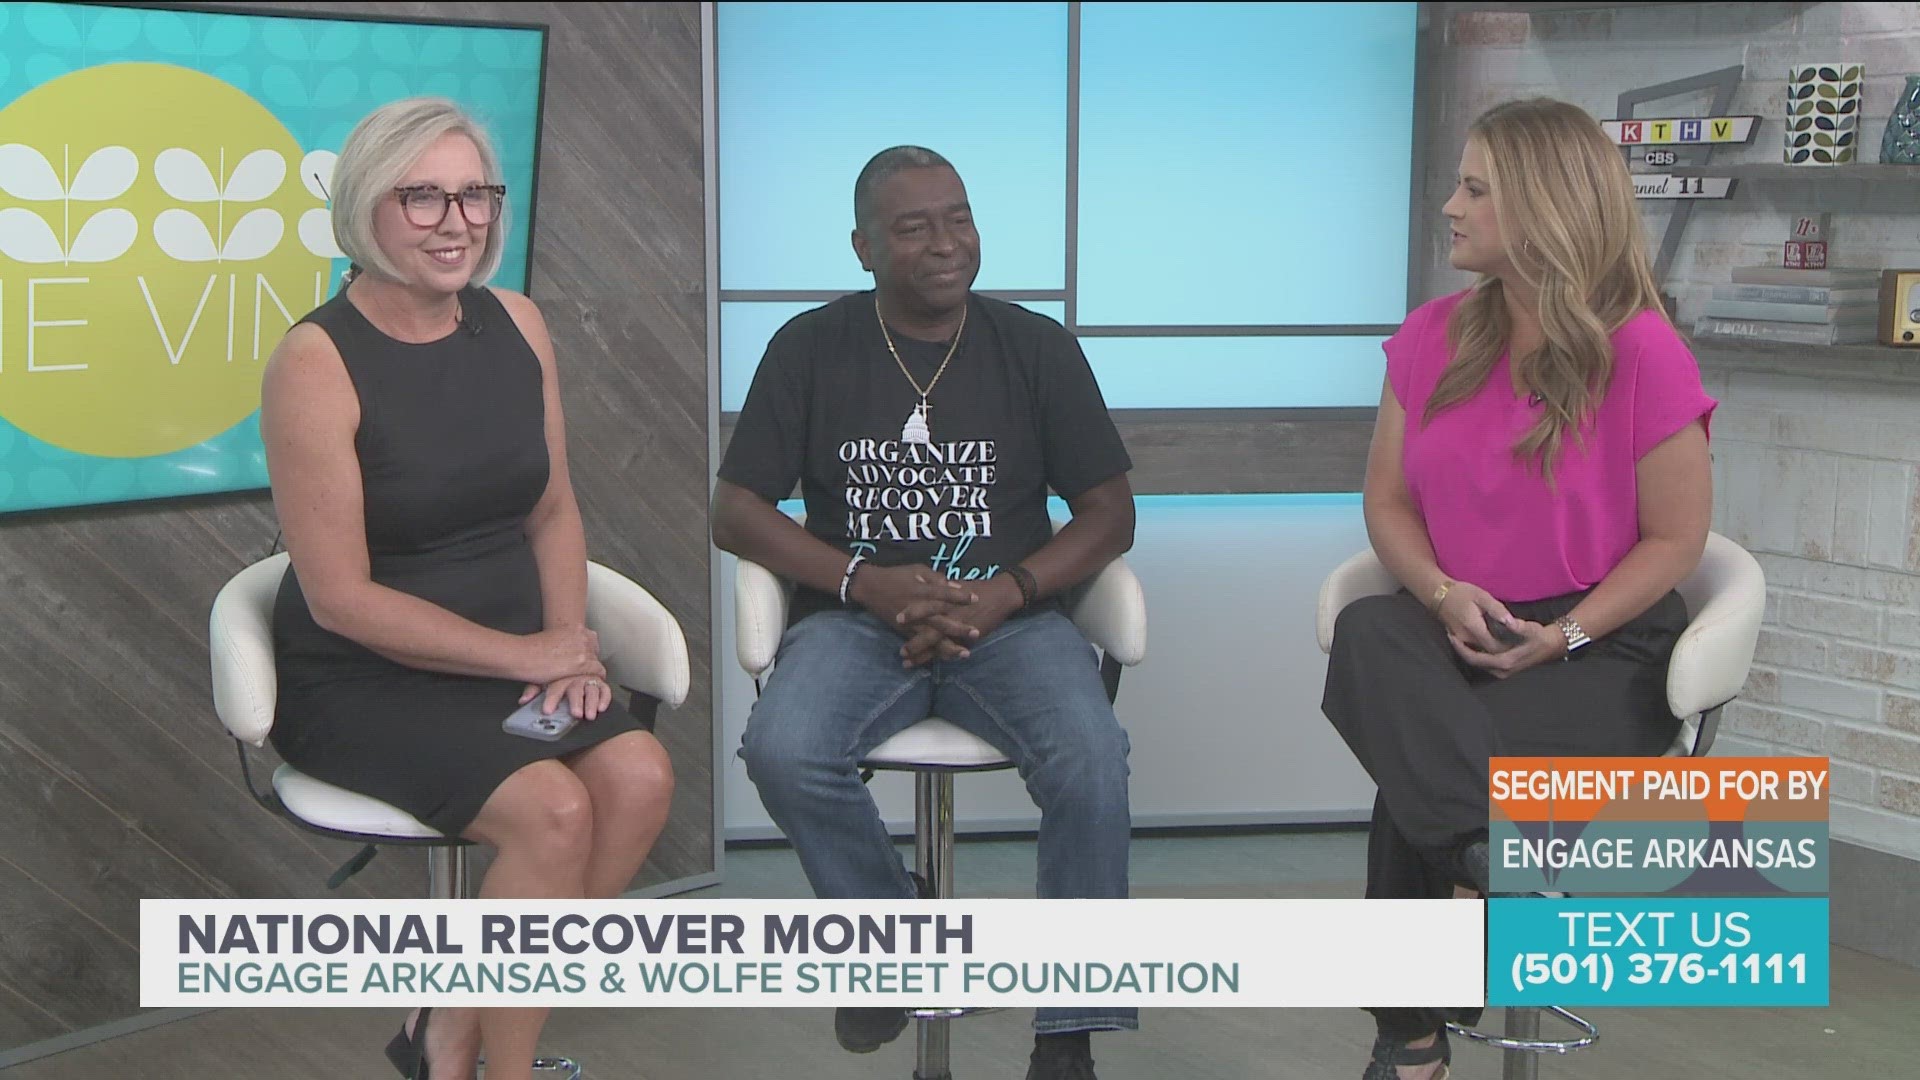 Monte Payne with Wolfe Street Foundation and Shana Chaplin from Engage Arkansas discuss initiatives to help people dealing with substance use disorders